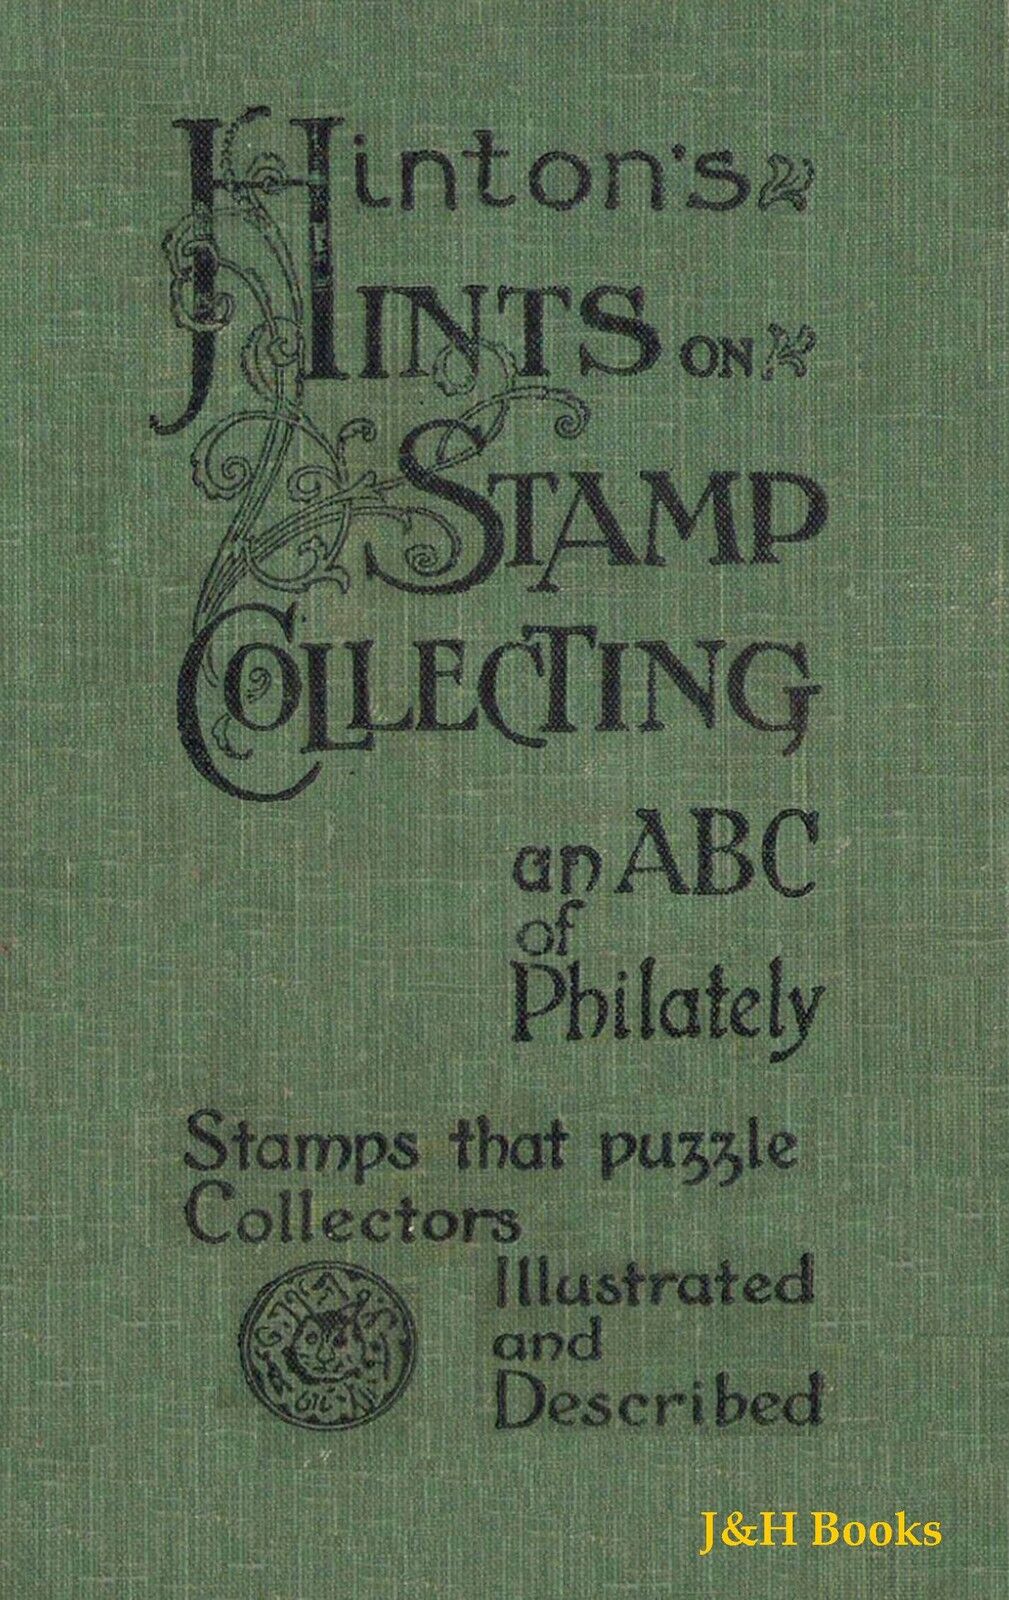 STAMPS THAT PUZZLE COLLECTORS Illustrated  Described, An ABC Of